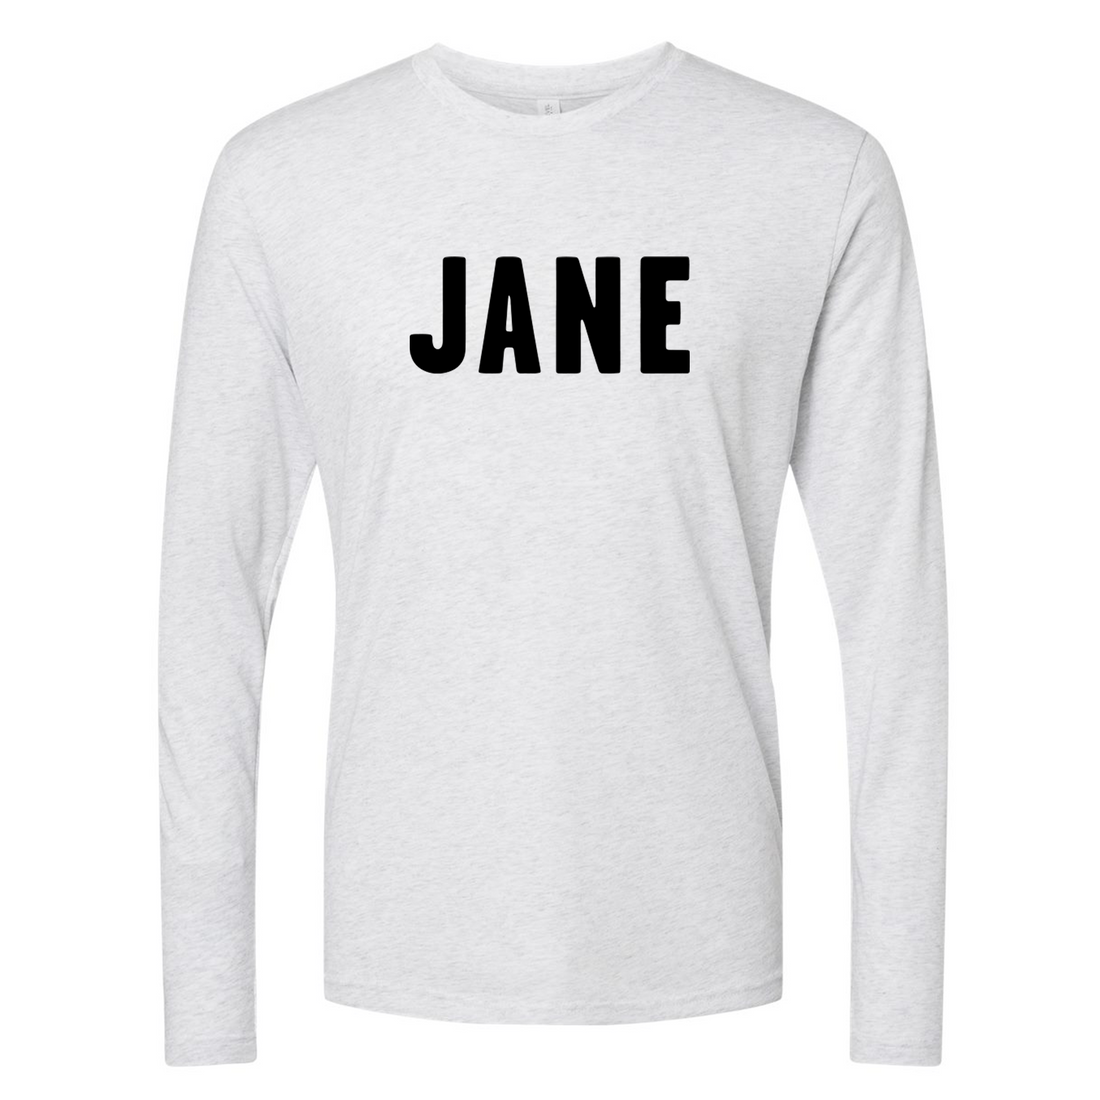 Unisex JANE Long Sleeve T-Shirt in White with Black Letters